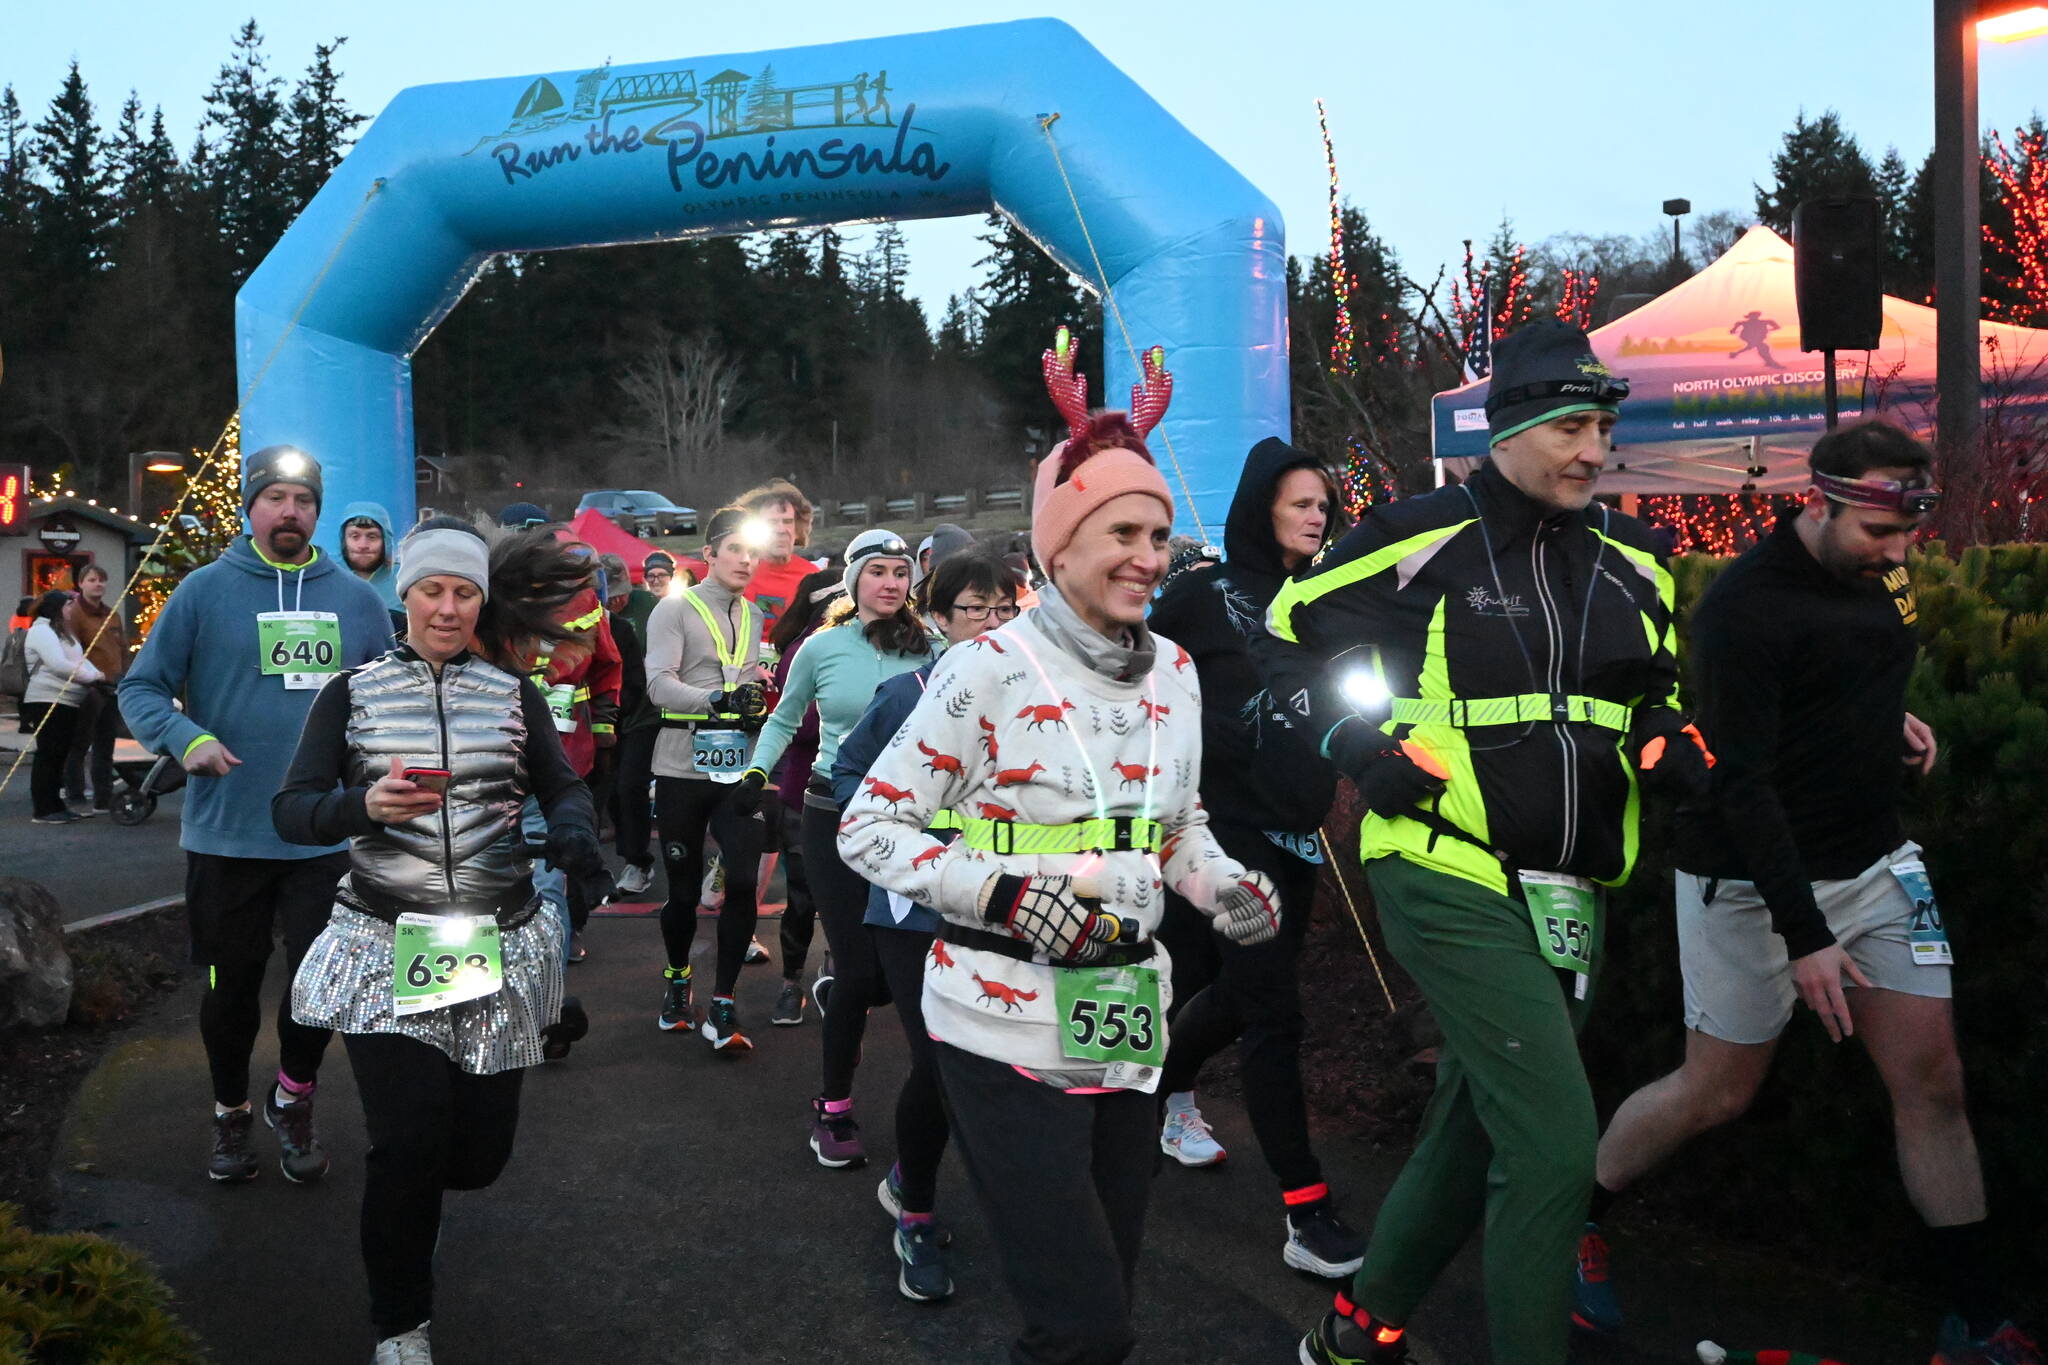 Sequim Gazette photoS by Michael Dashiell
Runners and walkers cross the starting line at the 2022 Jamestown S’Klallam Tribe 5k/10k race on Dec. 3. Many participants, including Timea Tihanyi of Seattle (553), wore holiday-themed costumes and flair.